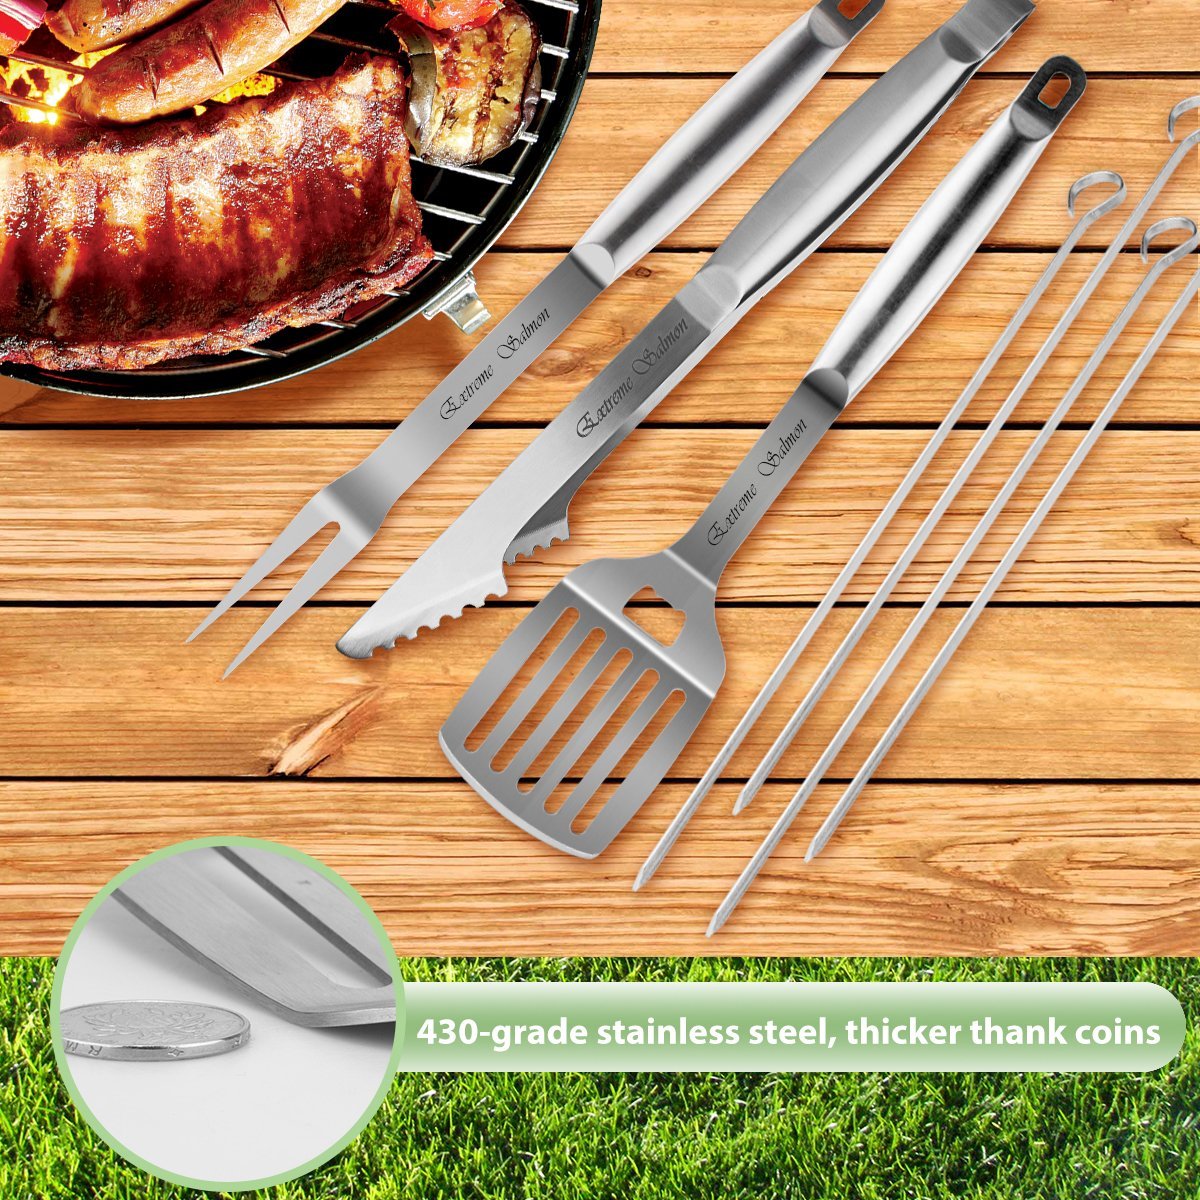 Grill Accessories, BBQ Tool Sets 7 PCS Grill Set Stainless Steel Grilling Utensils Heavy Duty Grill Tool Sets for Barbecue,Spatula,Tongs,Fork and 4 Skewers, Best Outdoor Grill Kit for Dad or Husband - image 3 of 7